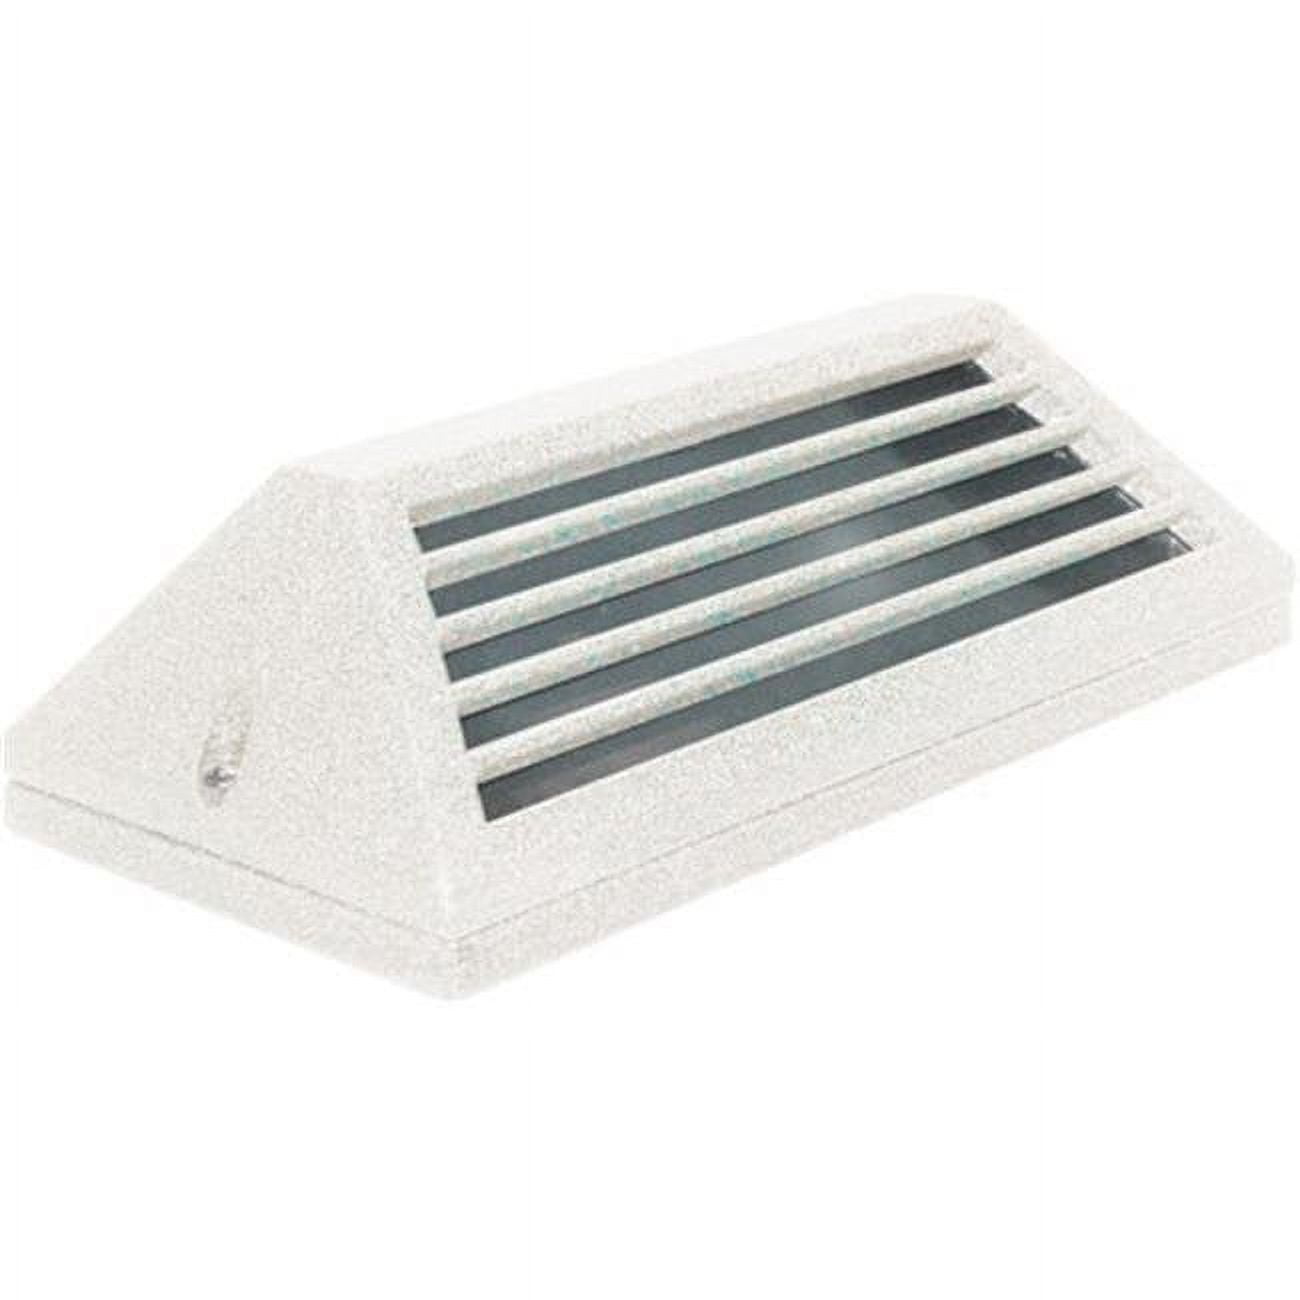 Picture of Dabmar Lighting LV608-W Cast Aluminum Surface Mount Louvered Brick, Step, Wall & Deck Light, White - 4 x 7.25 x 2.25 in.